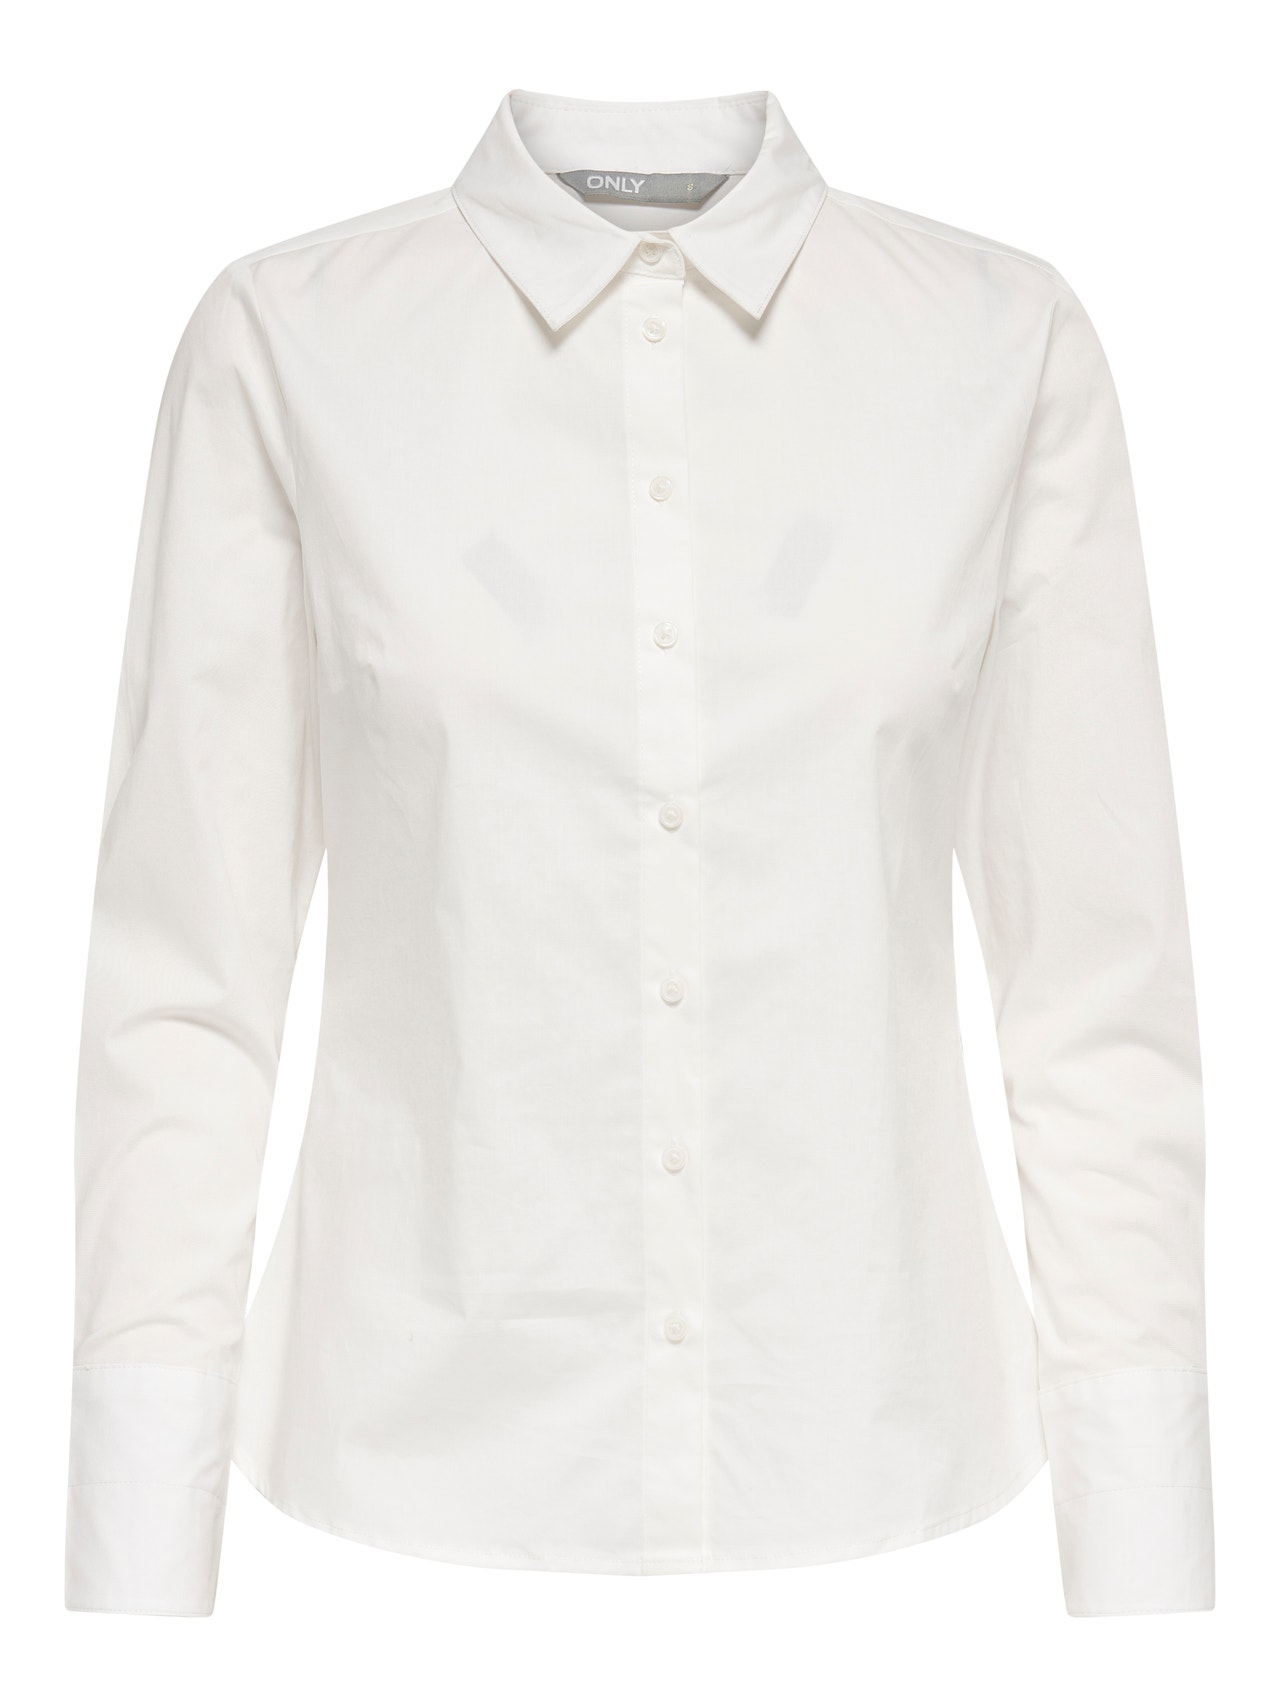 ONLY Classique Chemise -White - 15270350